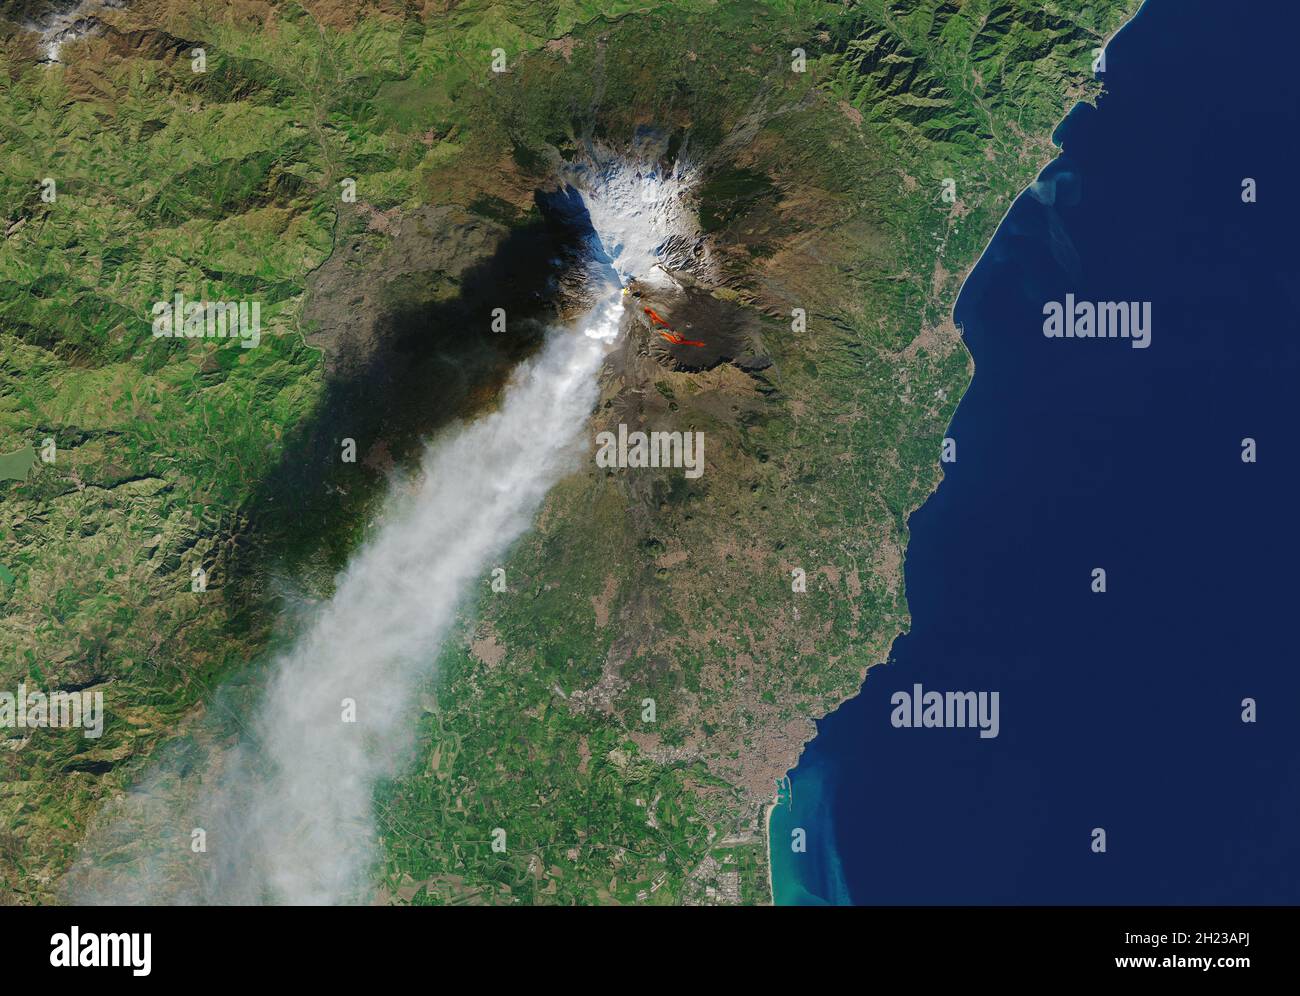 MOUNT ETNA, ITALY - 28 December 2018 - Satellite image showing Mount Etna during a flank eruption (an eruption from its side instead of its summit) on Stock Photo